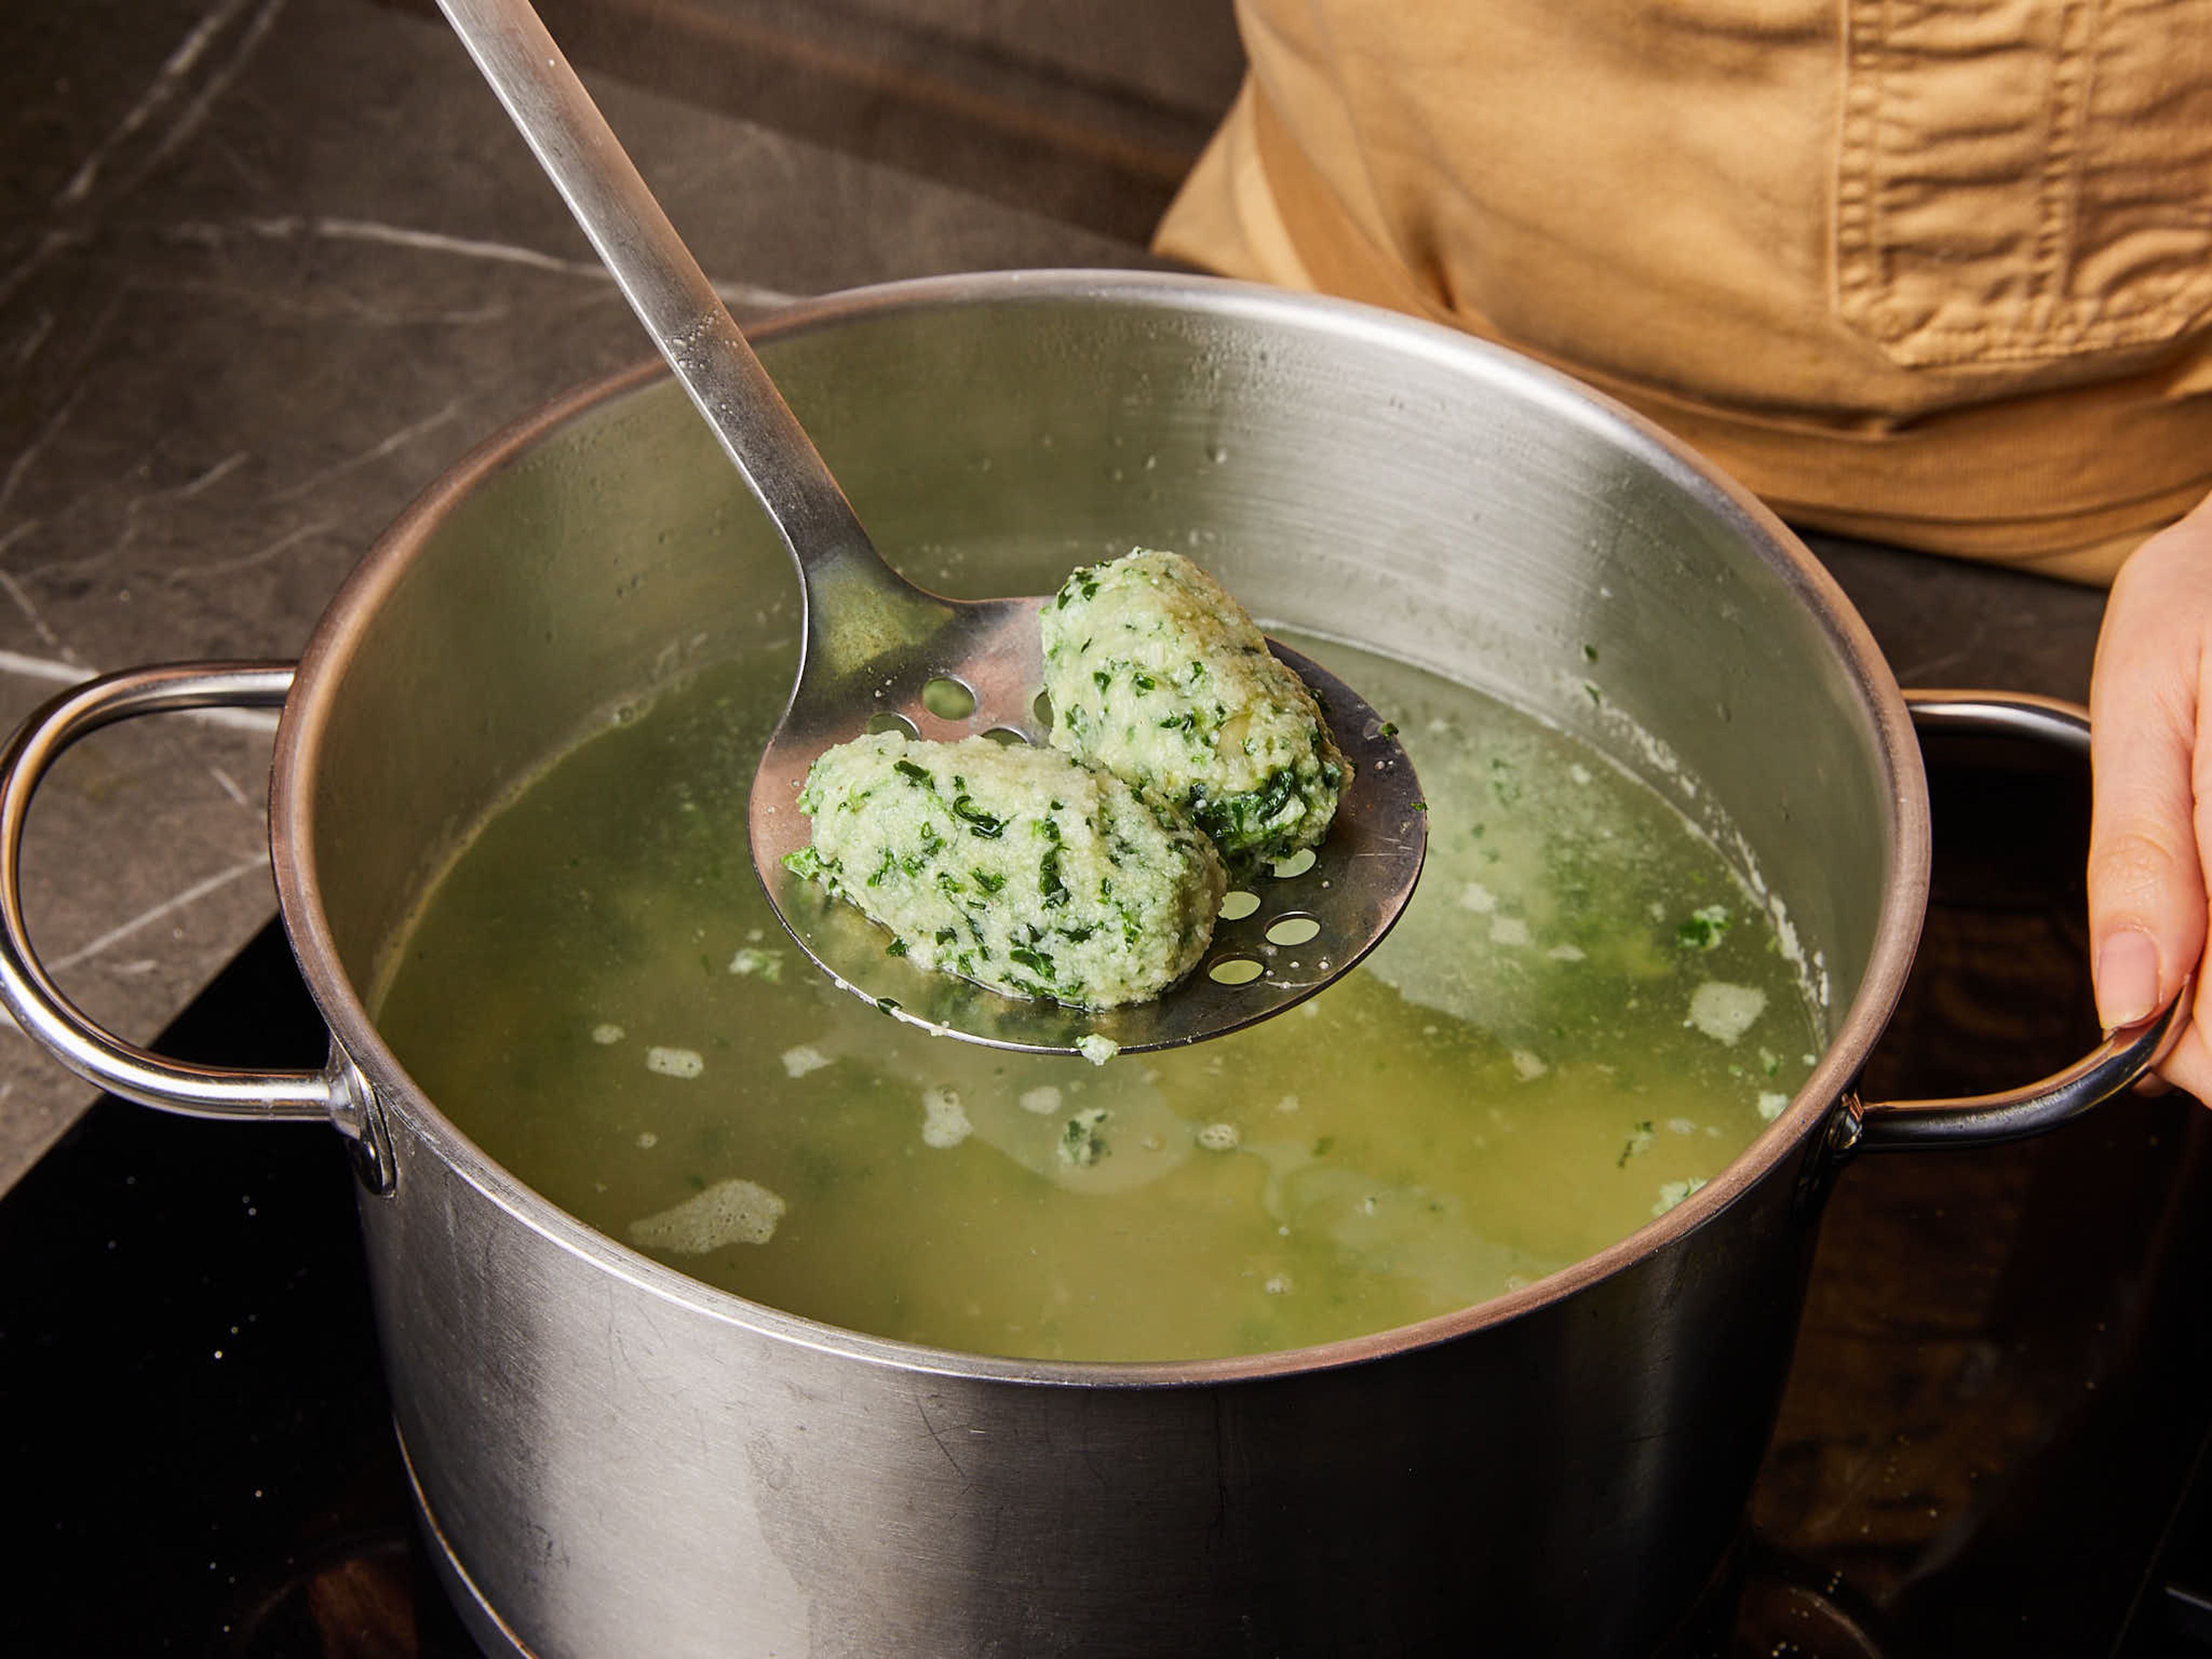 Reduce the water temperature to a simmer, and add the dumplings in batches. Cook over medium heat in gently simmering water for approx. 4 min. or until they float to the surface. Remove with a slotted spoon and drain with a sieve.